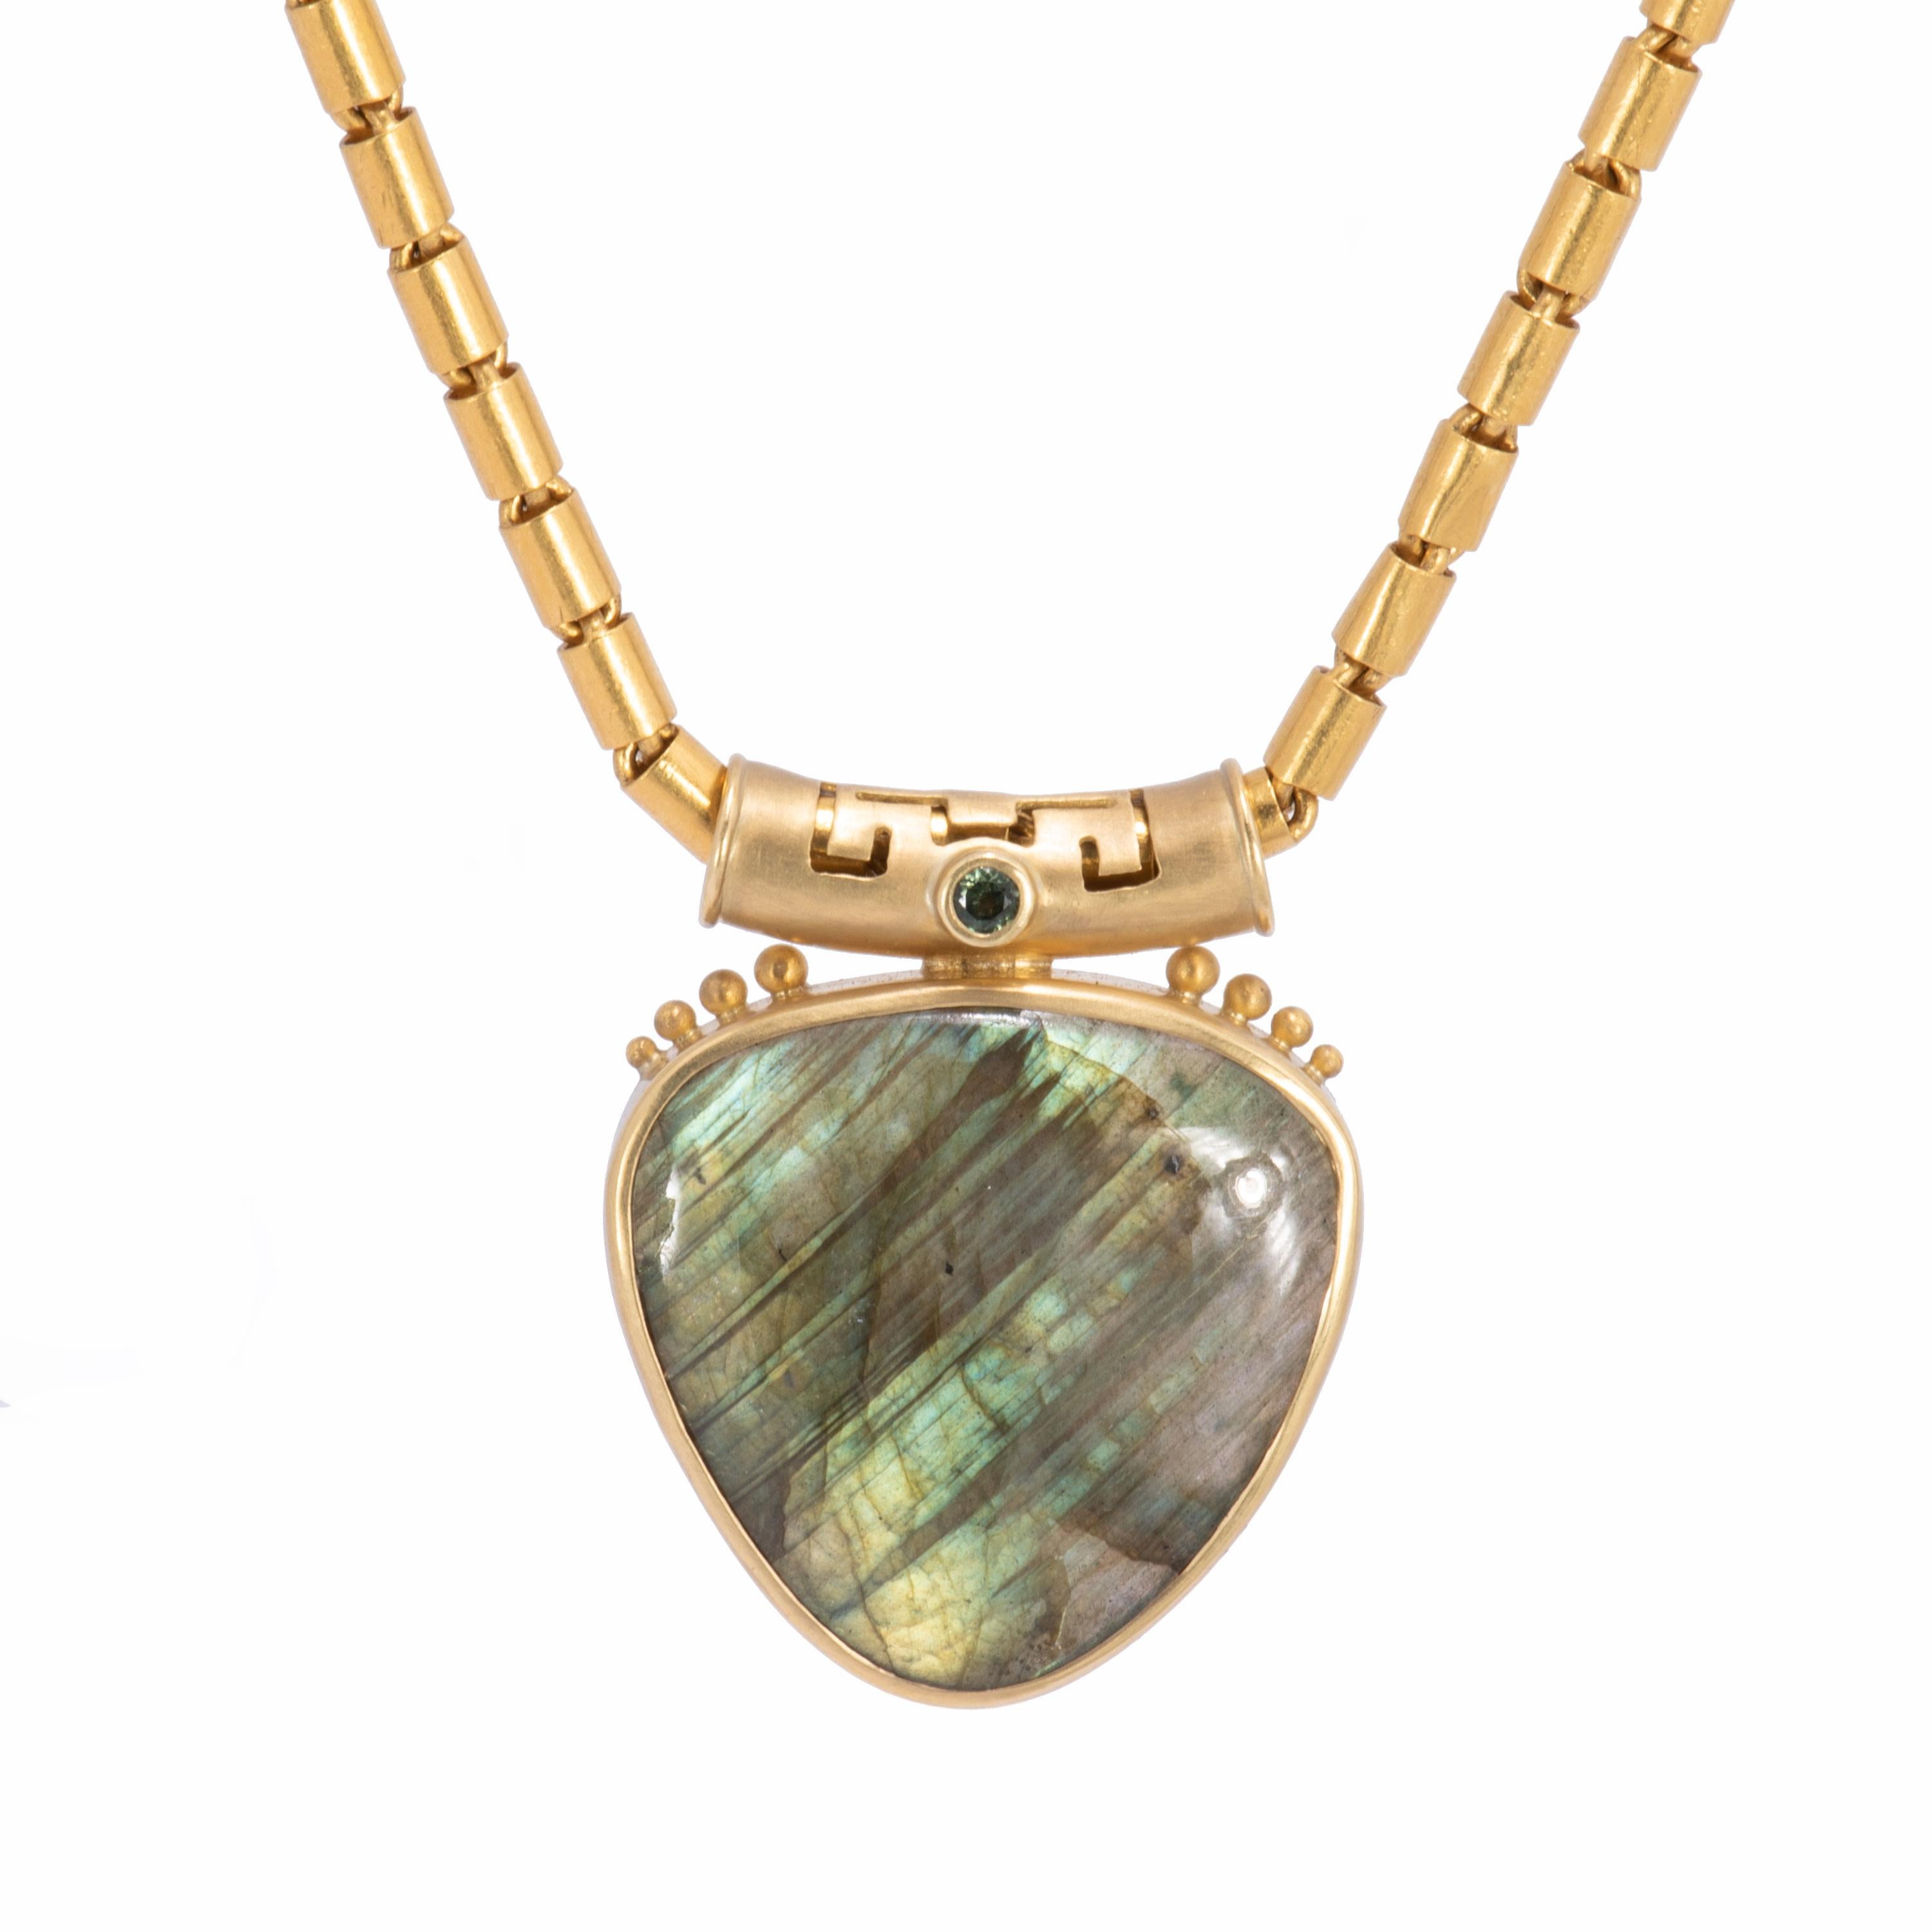 Our large green labradorite shield pendant is streaked with gold and pale blue lights and framed in 18 karat gold. Graduated gold beads along the crown highlight a curved slide bail like an Asian temple with geometric cutwork. A sparkling deep green